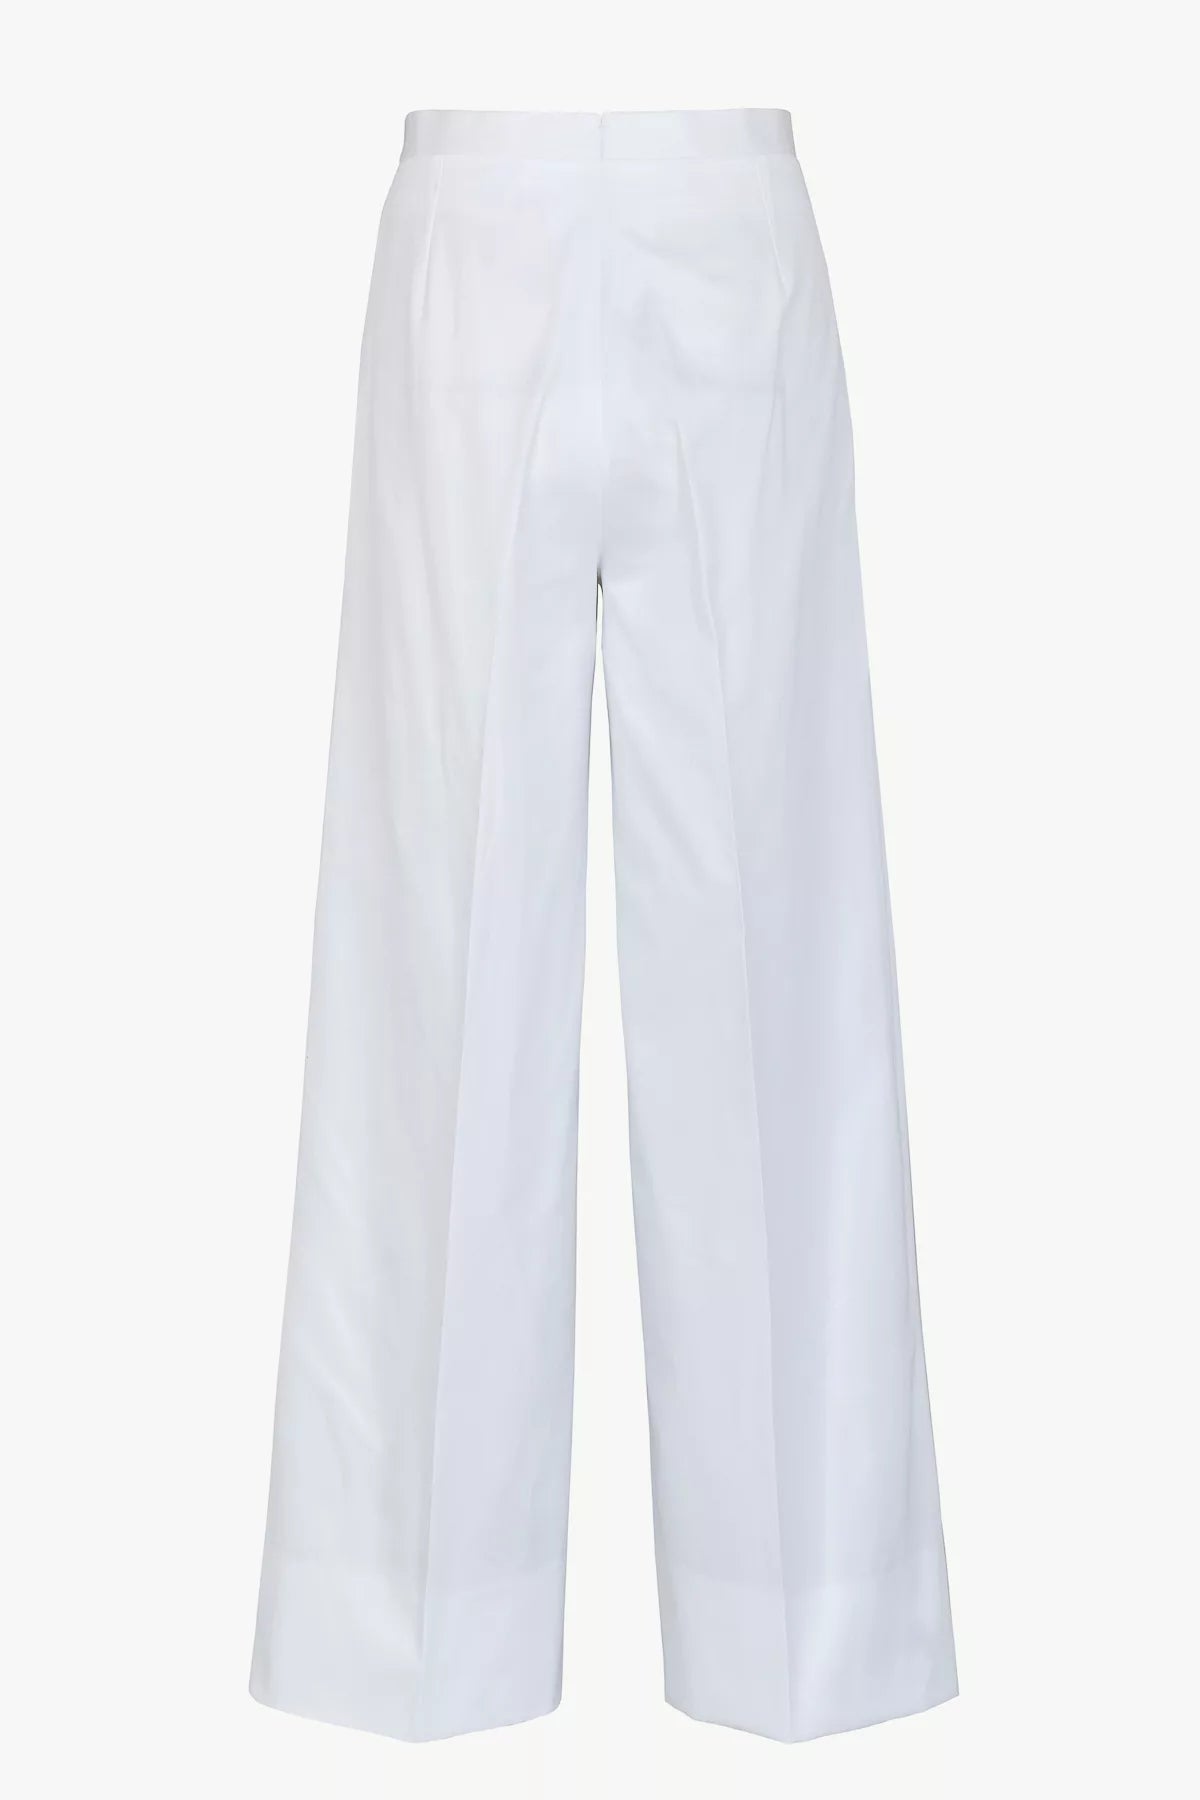 Giuliva-Heritage-The-Elsa-Trousers-Cotton-Twill_Optical-White-Amarees